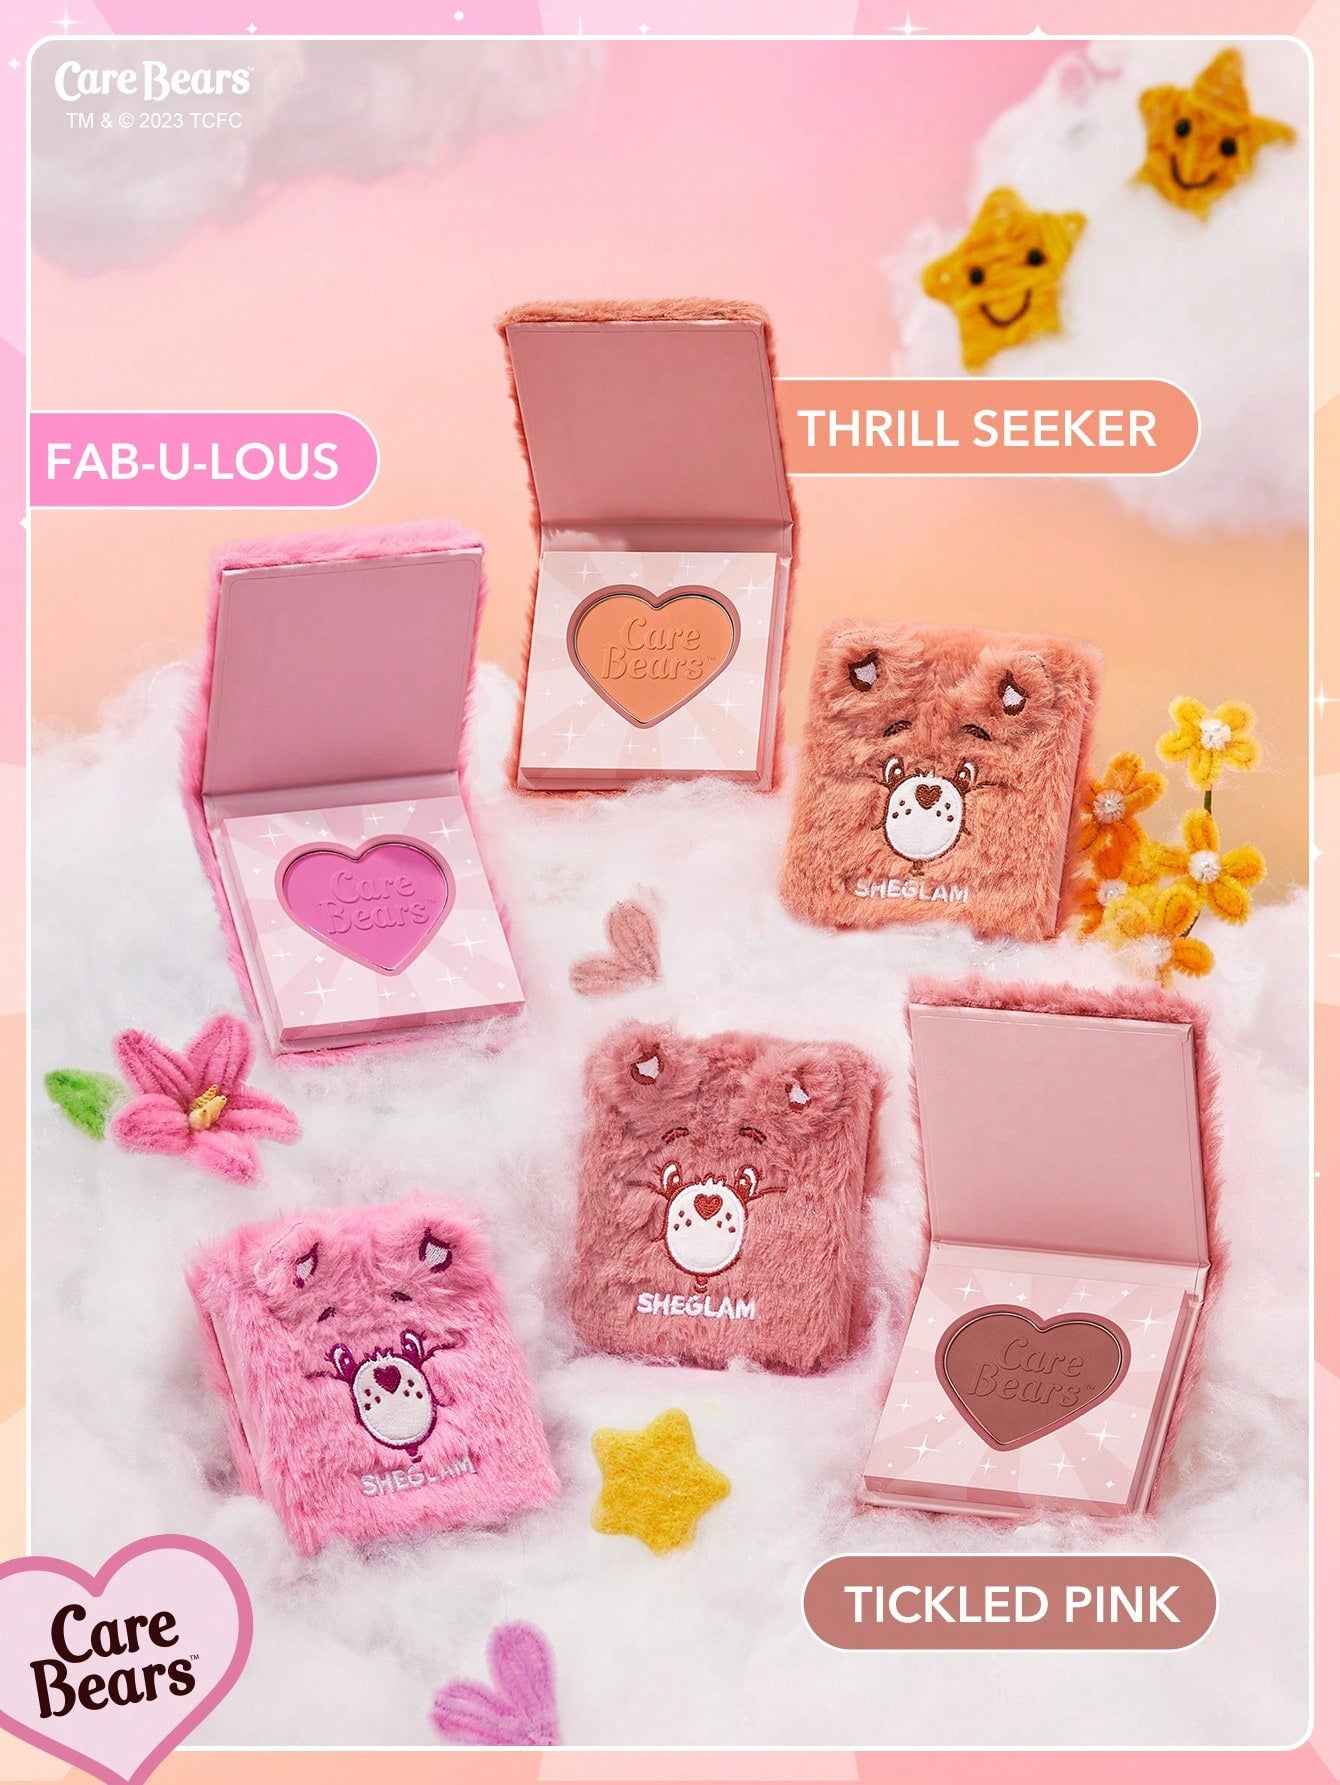 X Care Bears Cuddle Time Blush-Tickled Pink